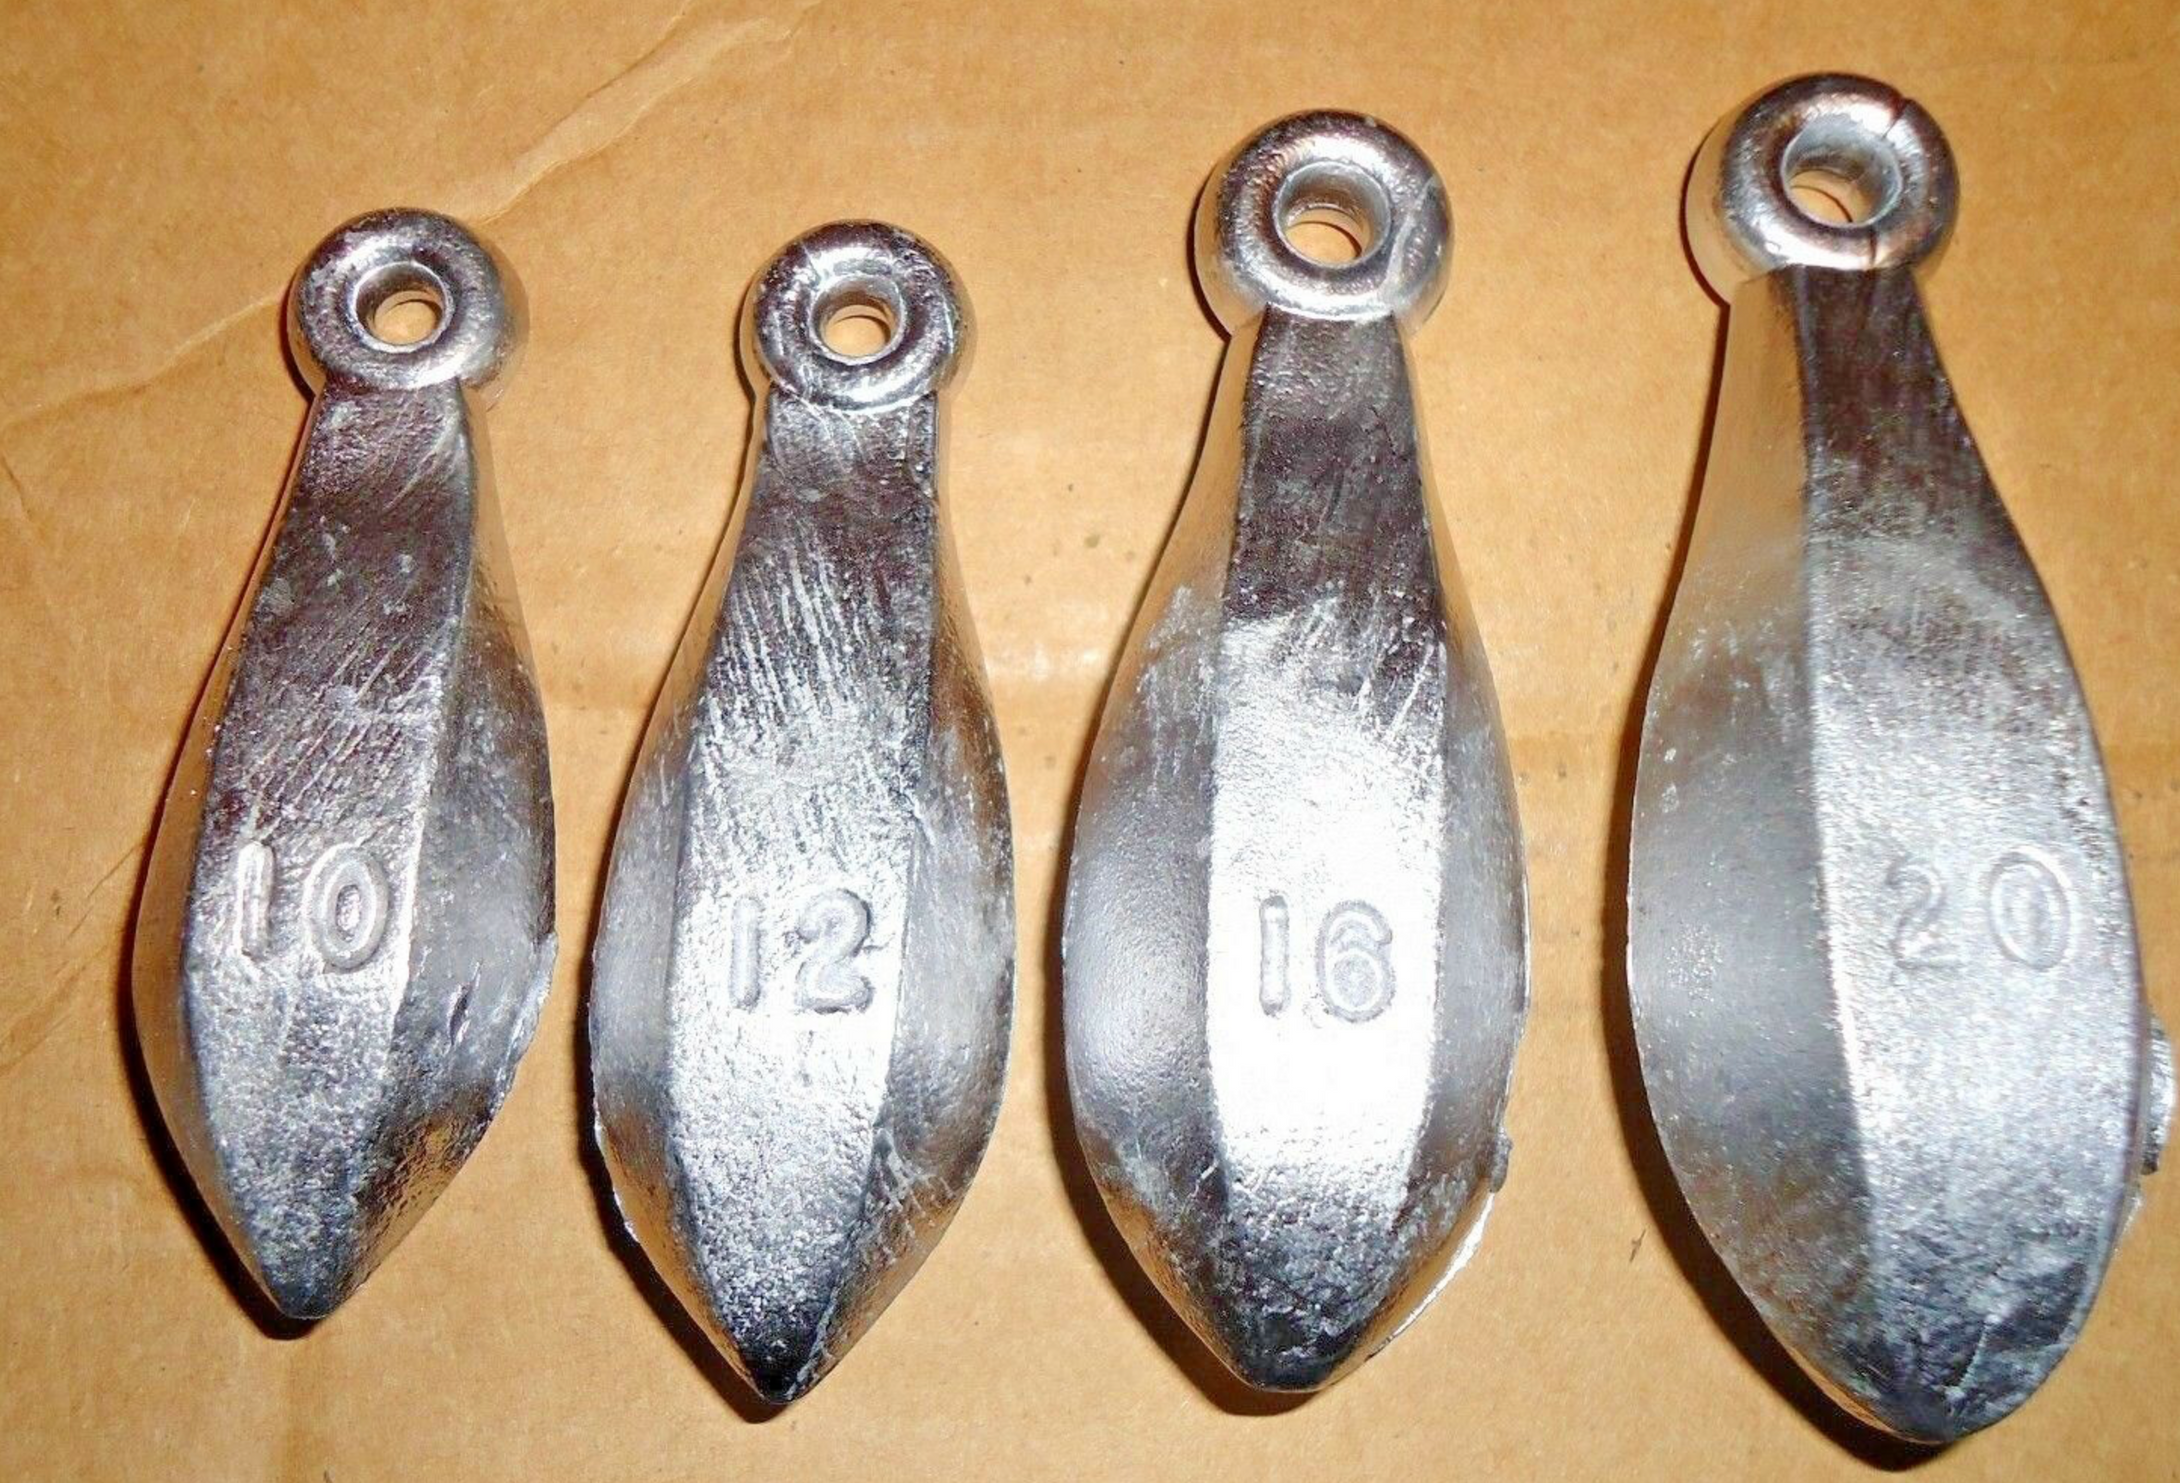 Bank Sinkers-10-20 oz. This is Where I Buy My Lead Weight Bank